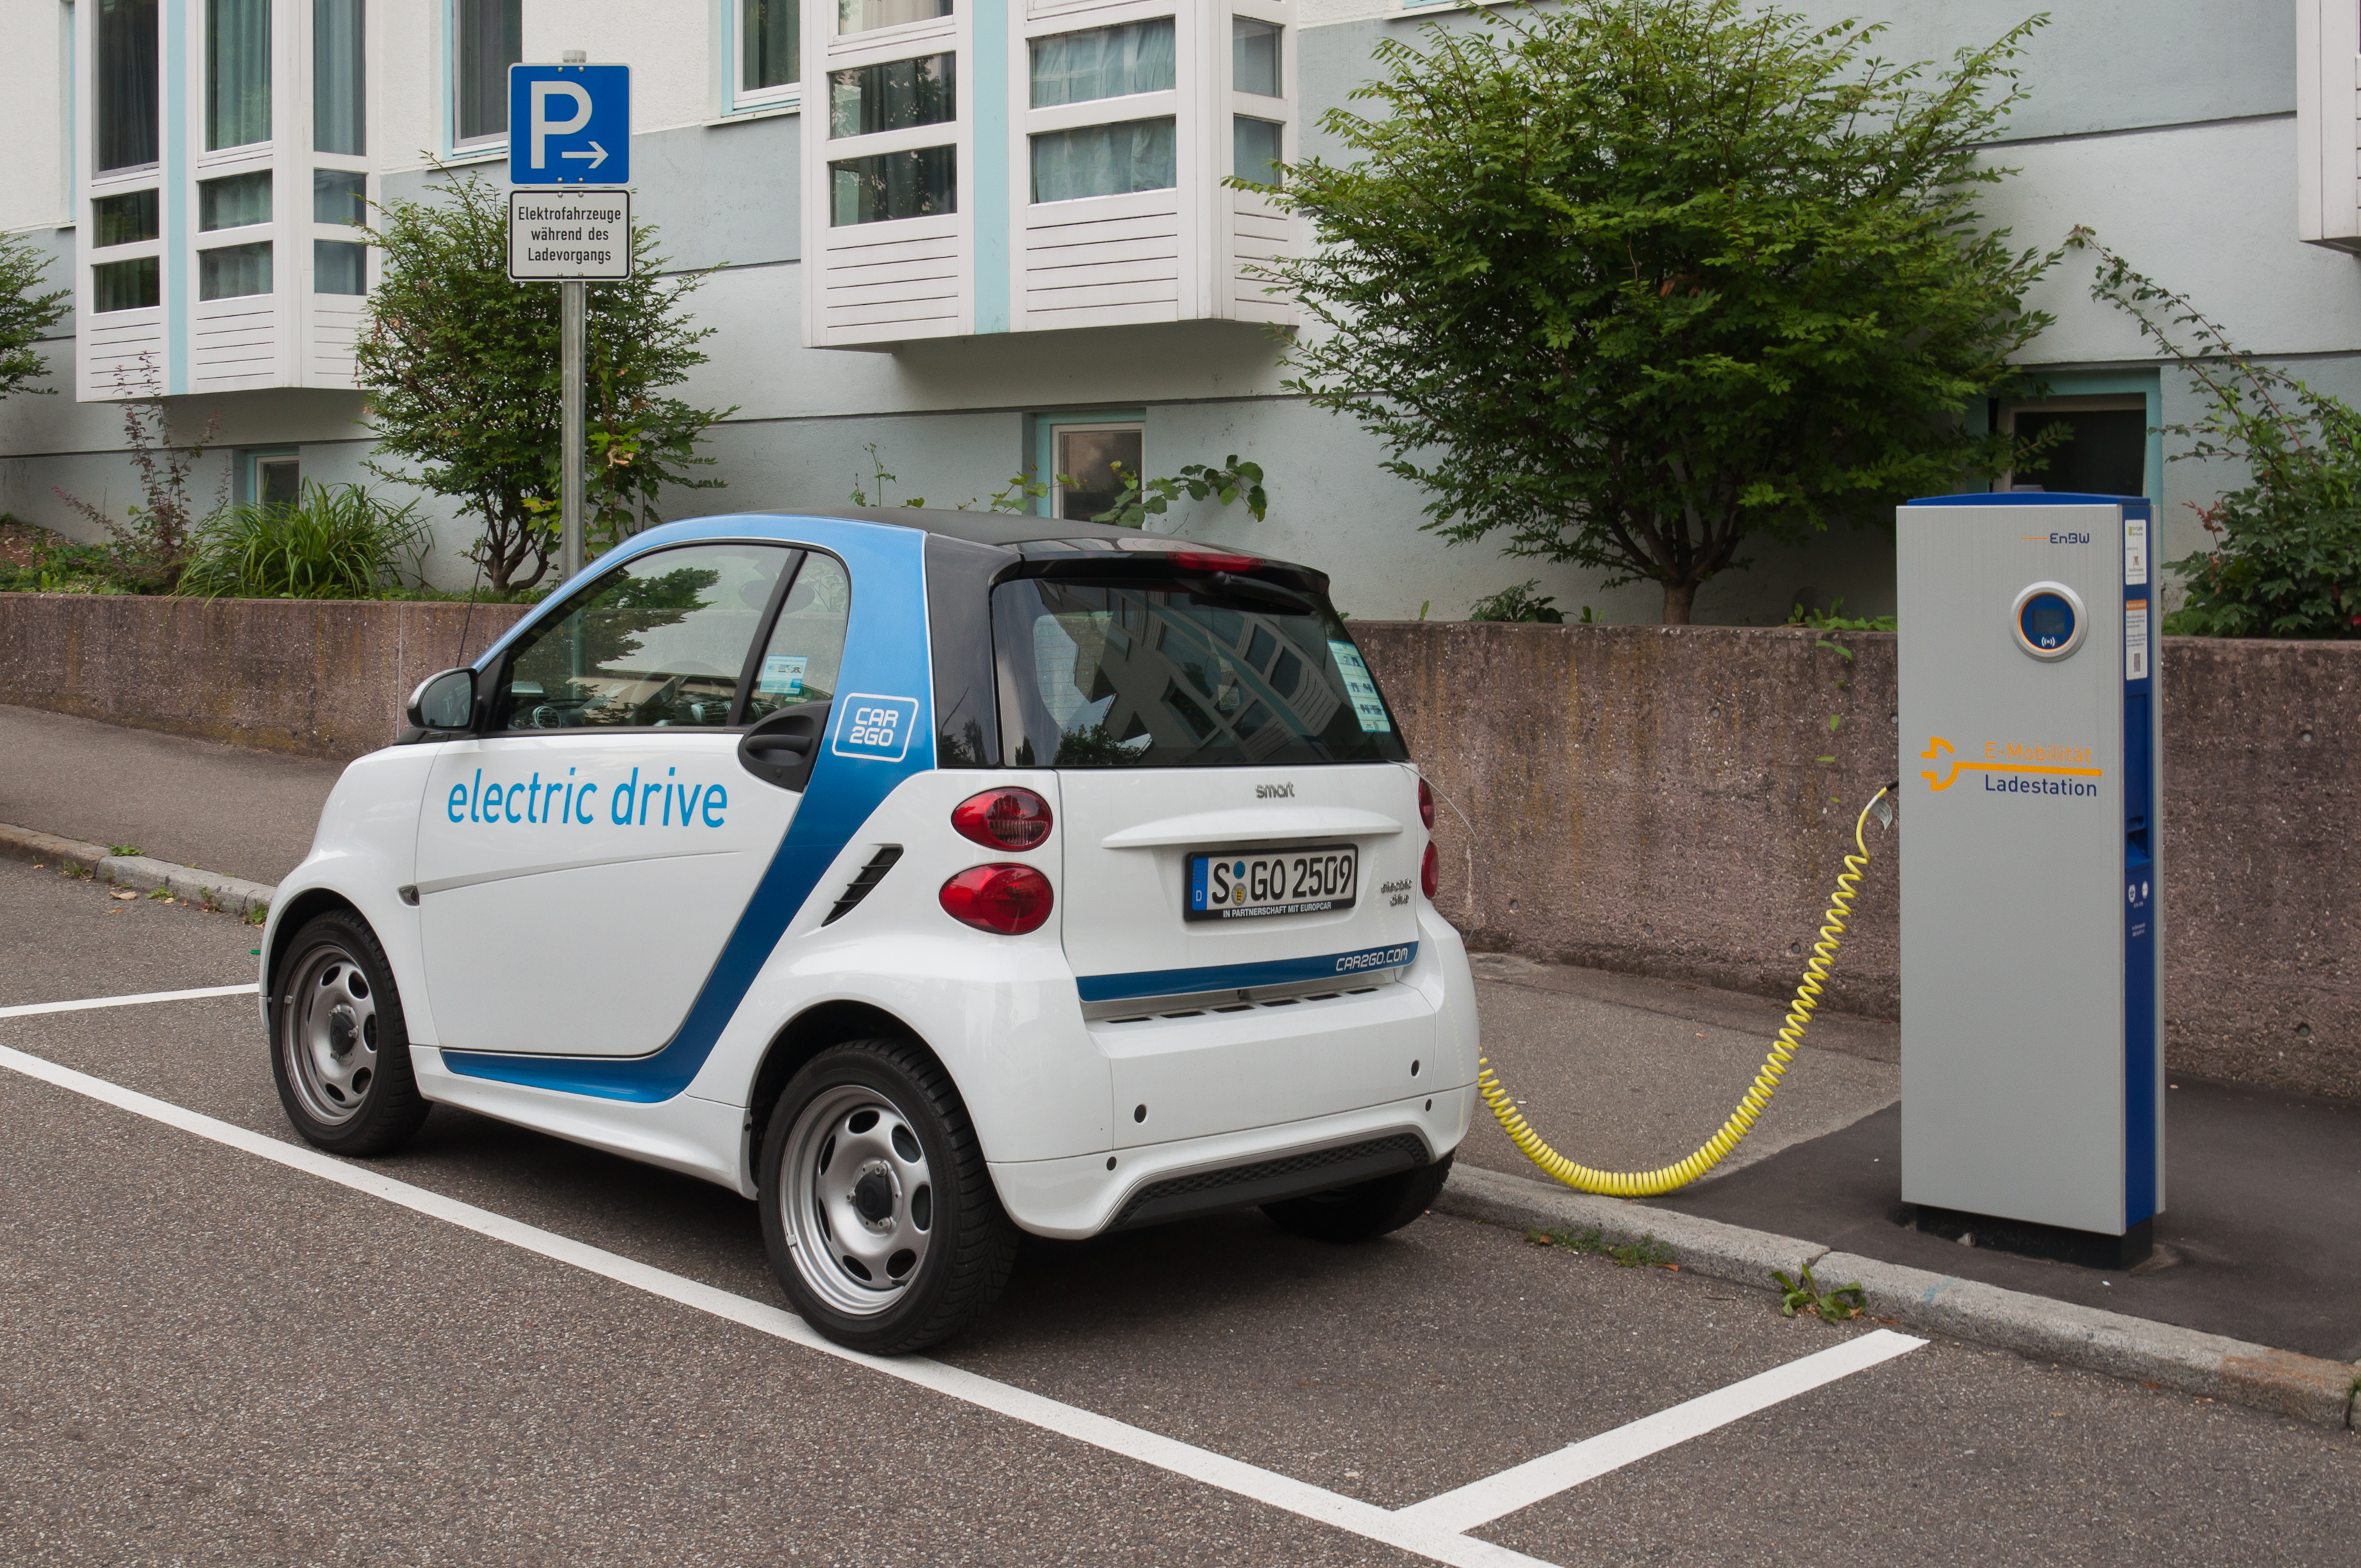 an image of electric%20cars Smart electric drive